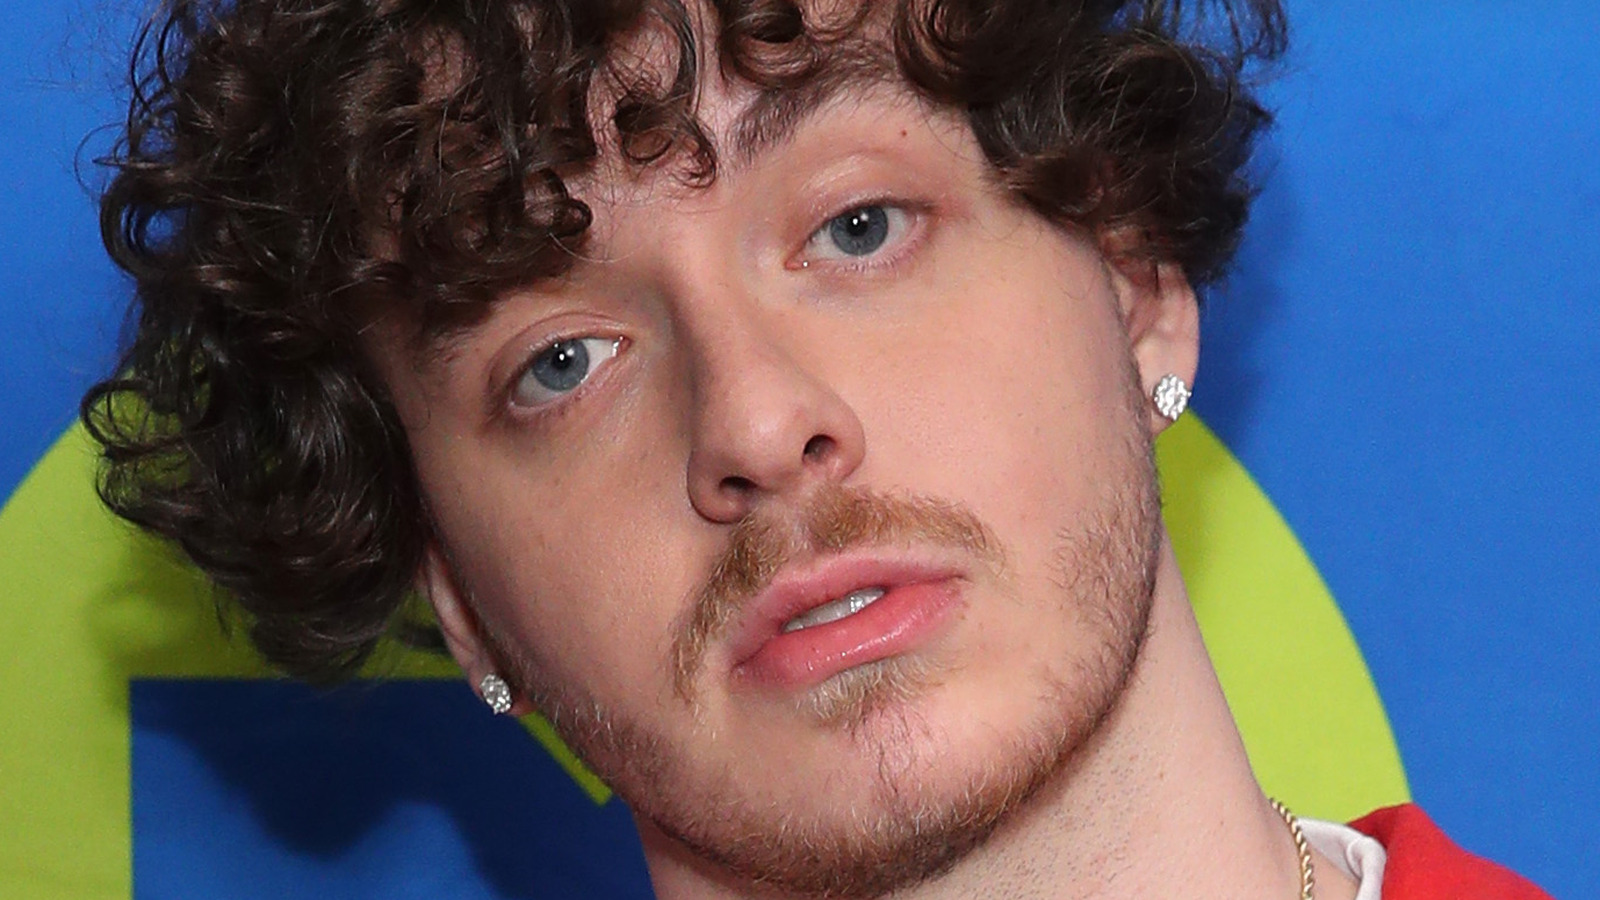 What Is Jack Harlow's Net Worth?